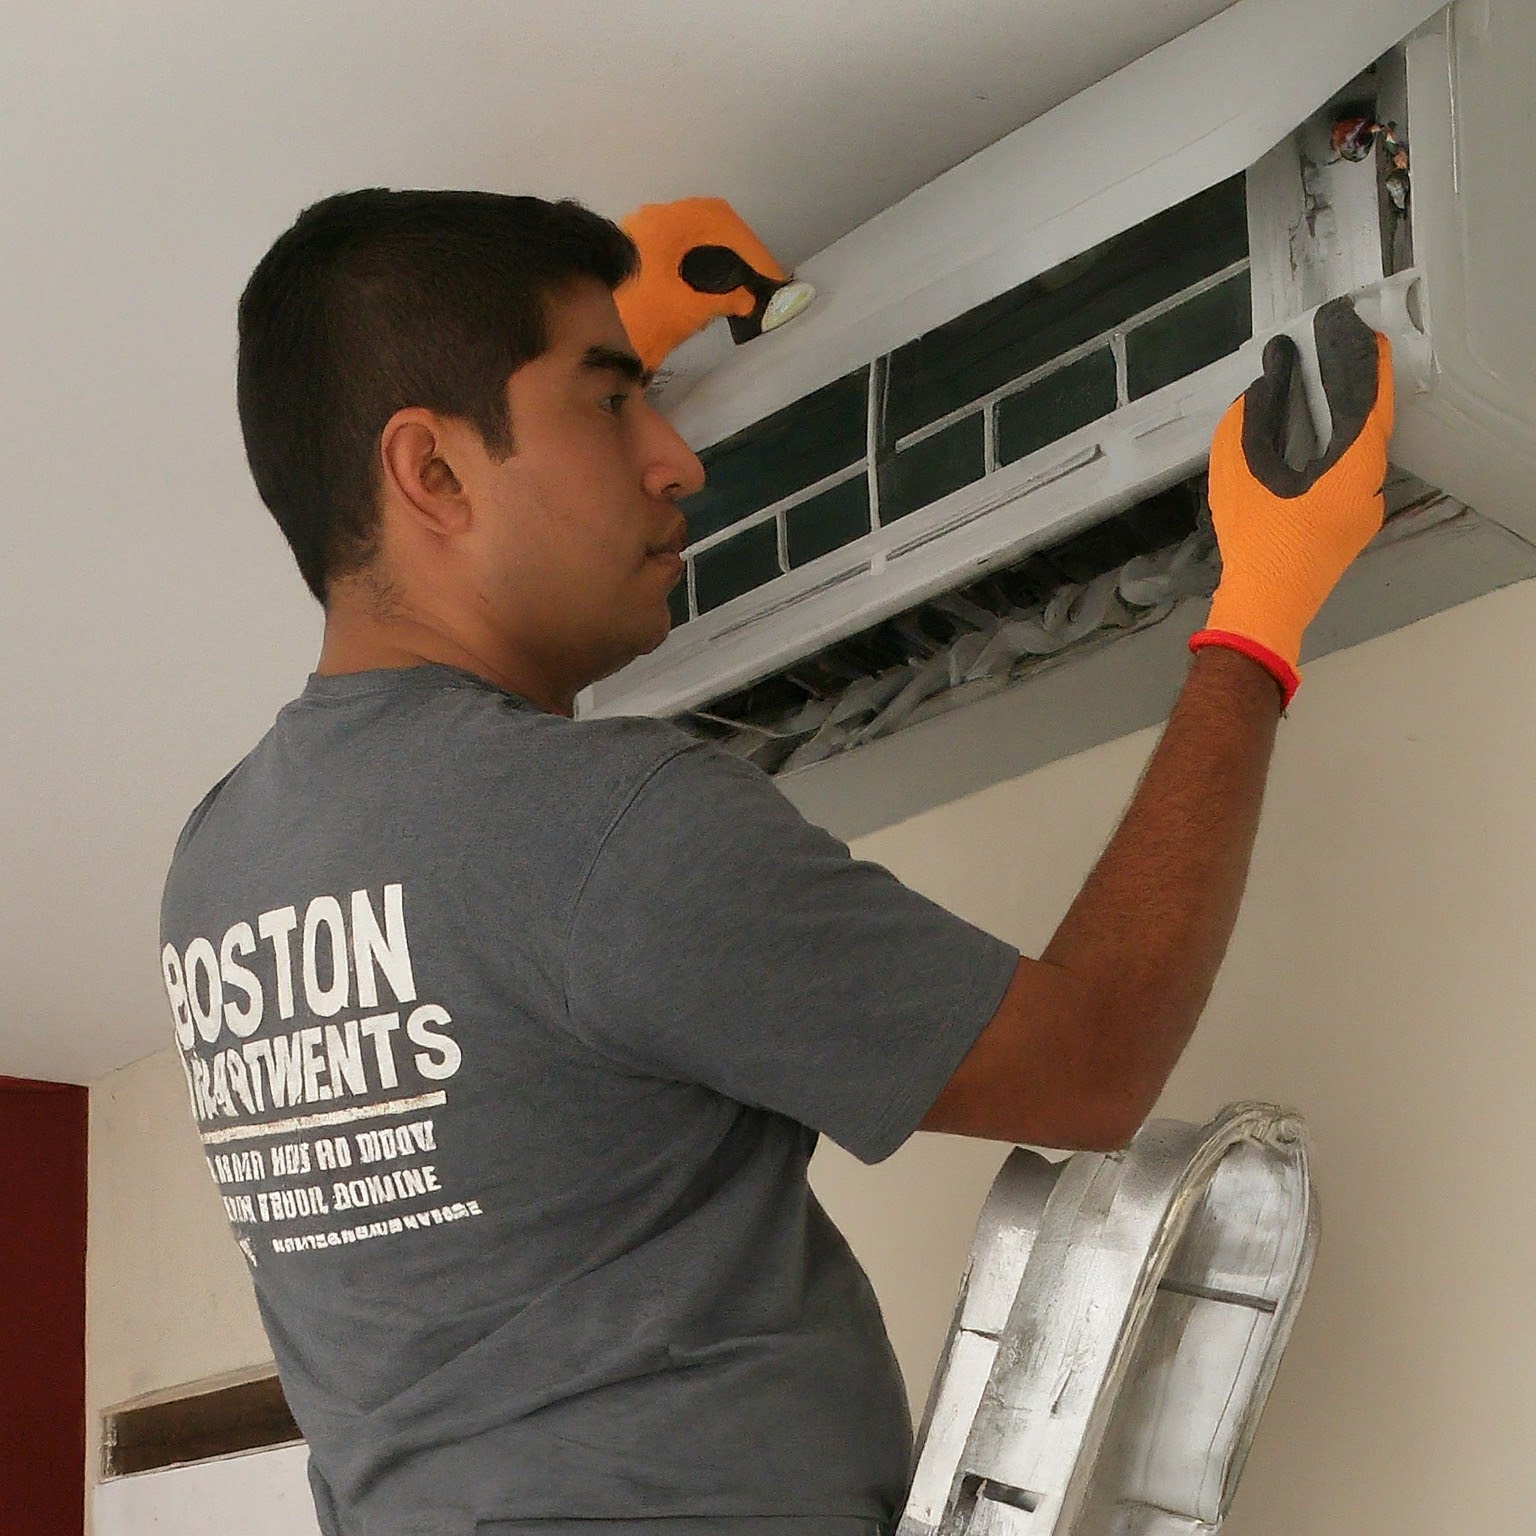 person repairing an air conditioner. Image by Gemini